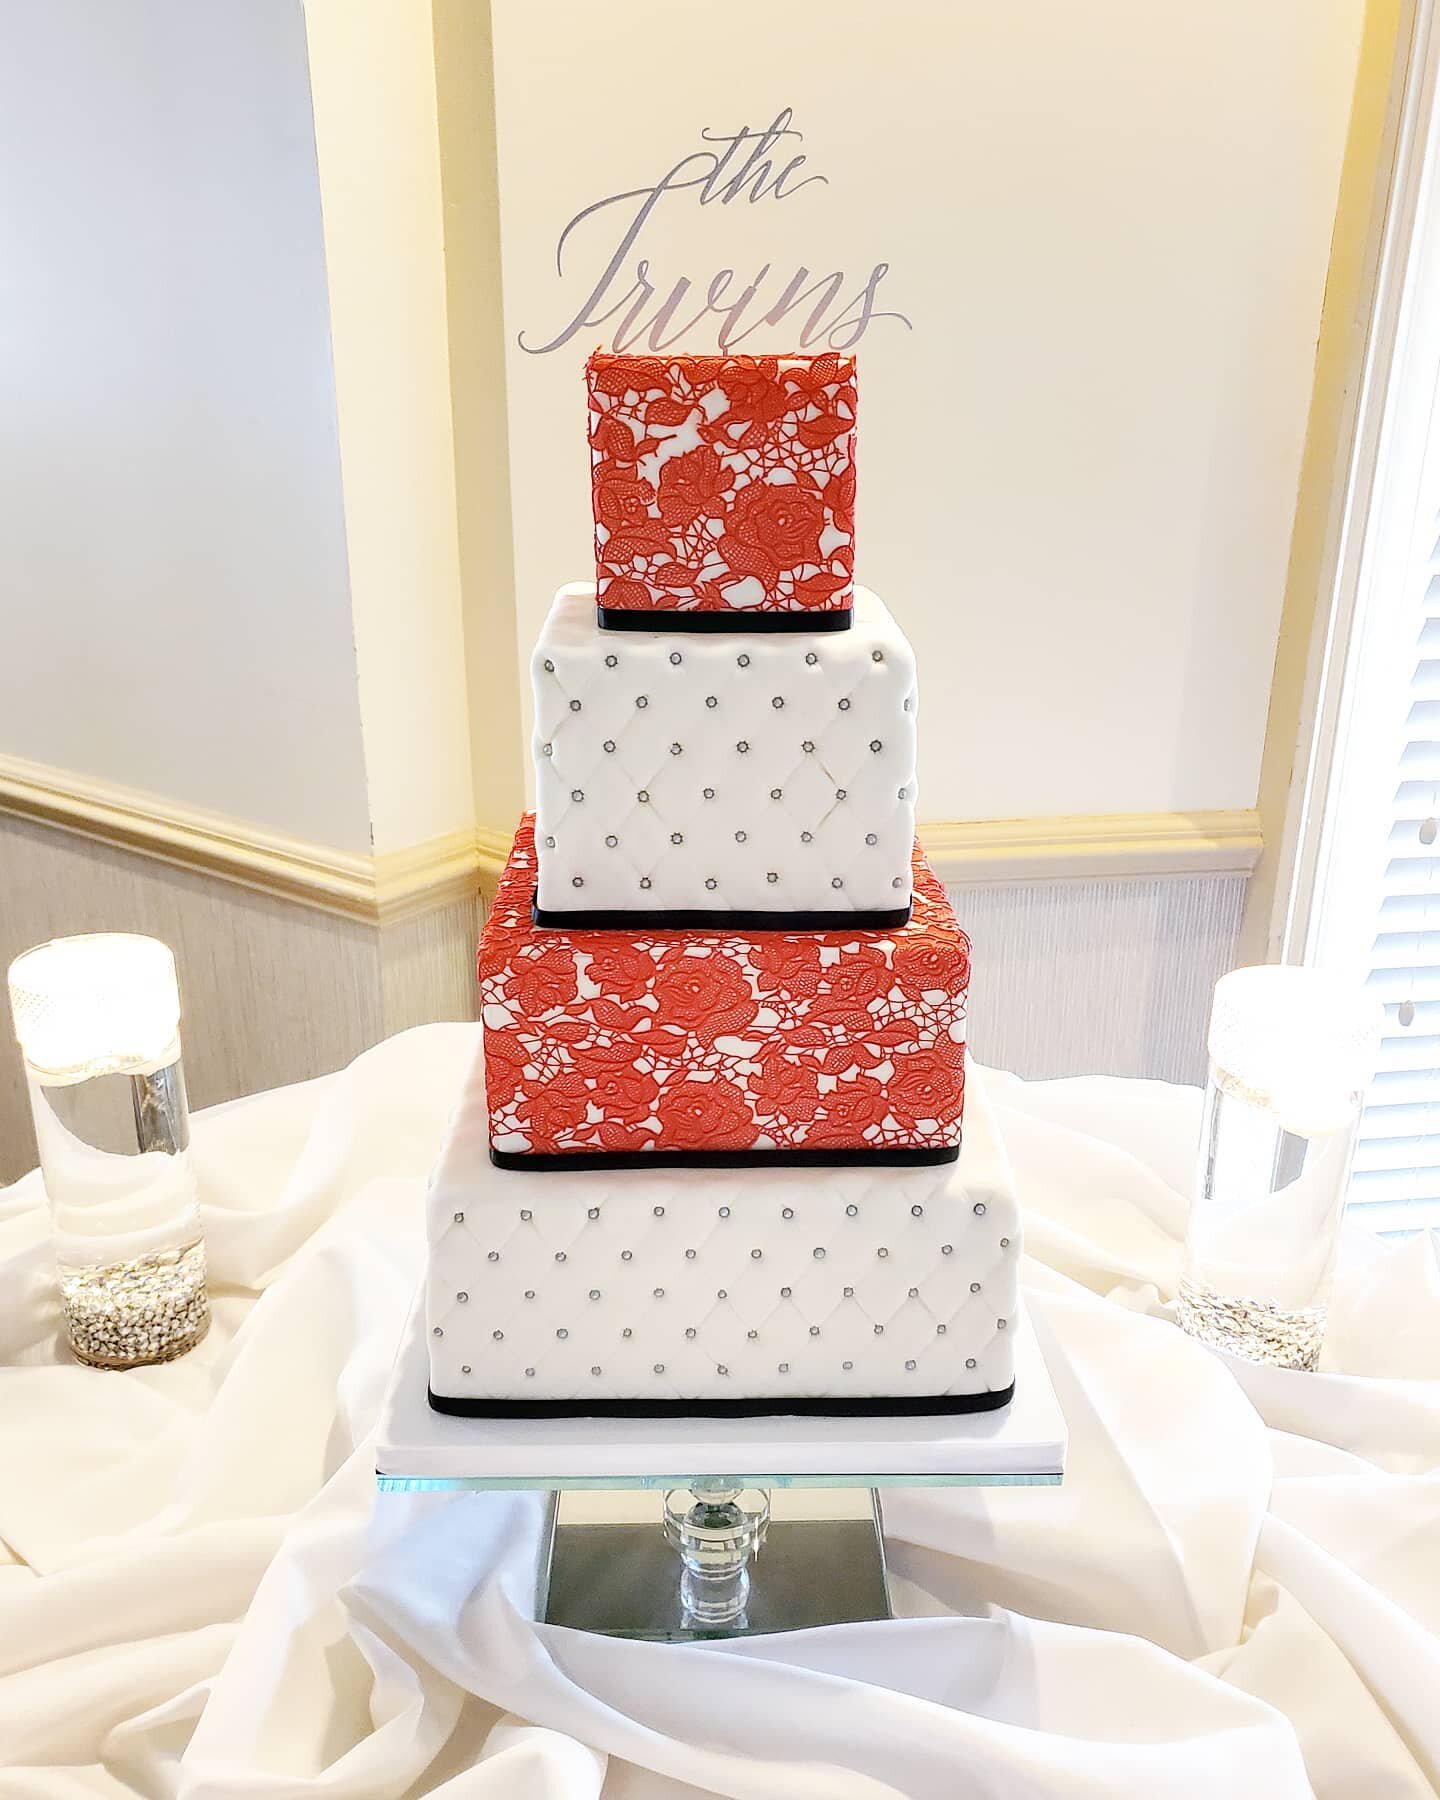 Our last stop from the two weekends ago wedding madness was @treyburncc for this all red lace and quilting stunner. 😳 #quilted #quiltedcake #quiltedcakes #wedding #weddingcake #weddingcakes #cake #cakes #uniquecake #uniquecakes #customcake #customca